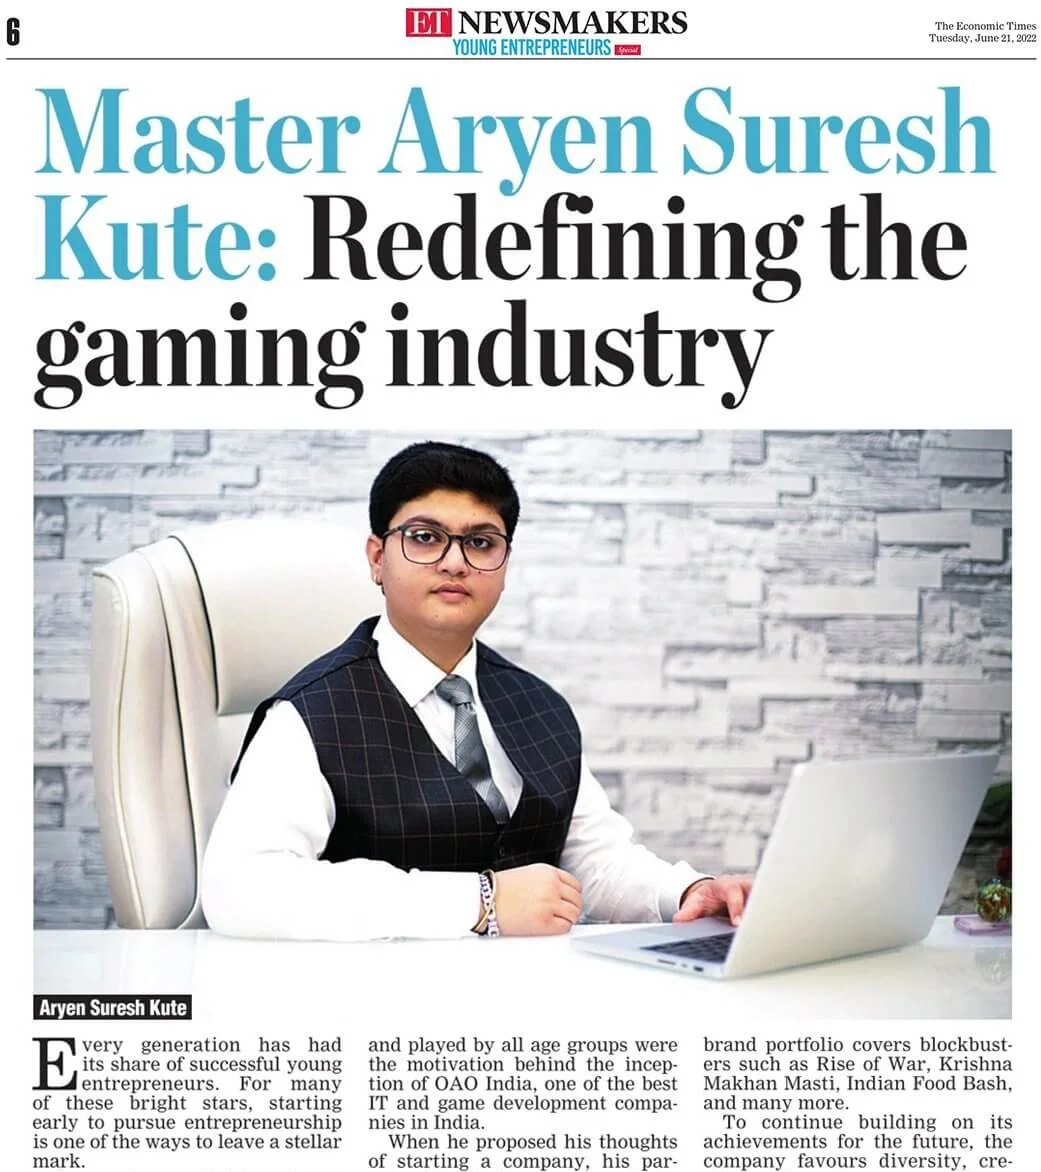 aryen kute featured in the economic times